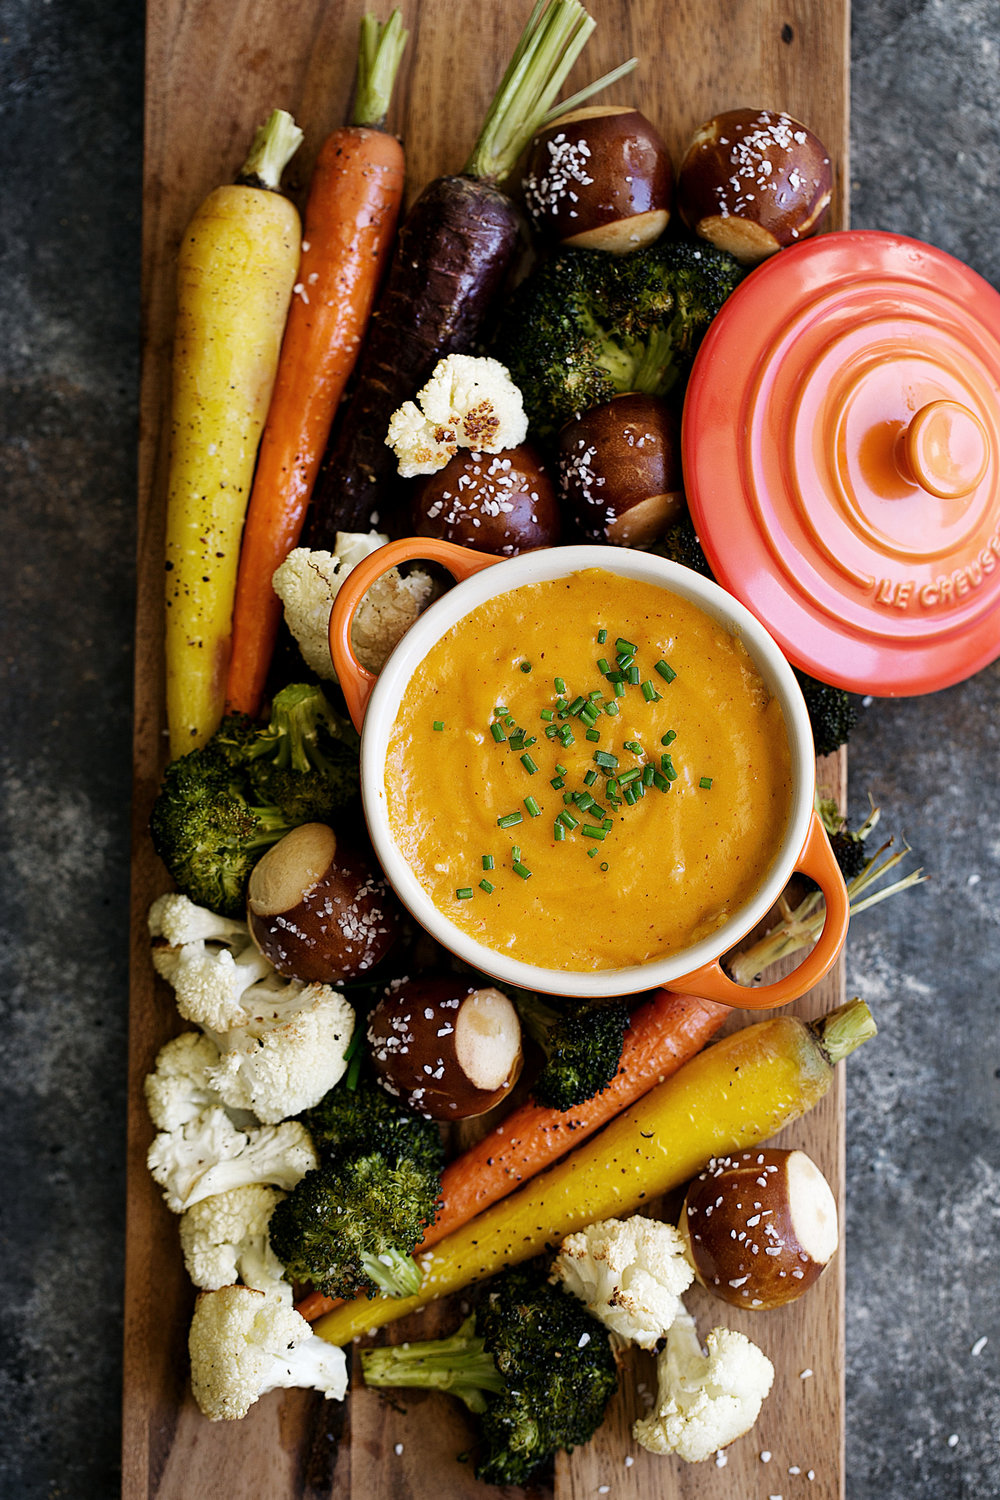 aged cheddar fondue with roasted vegetables and pretzel balls